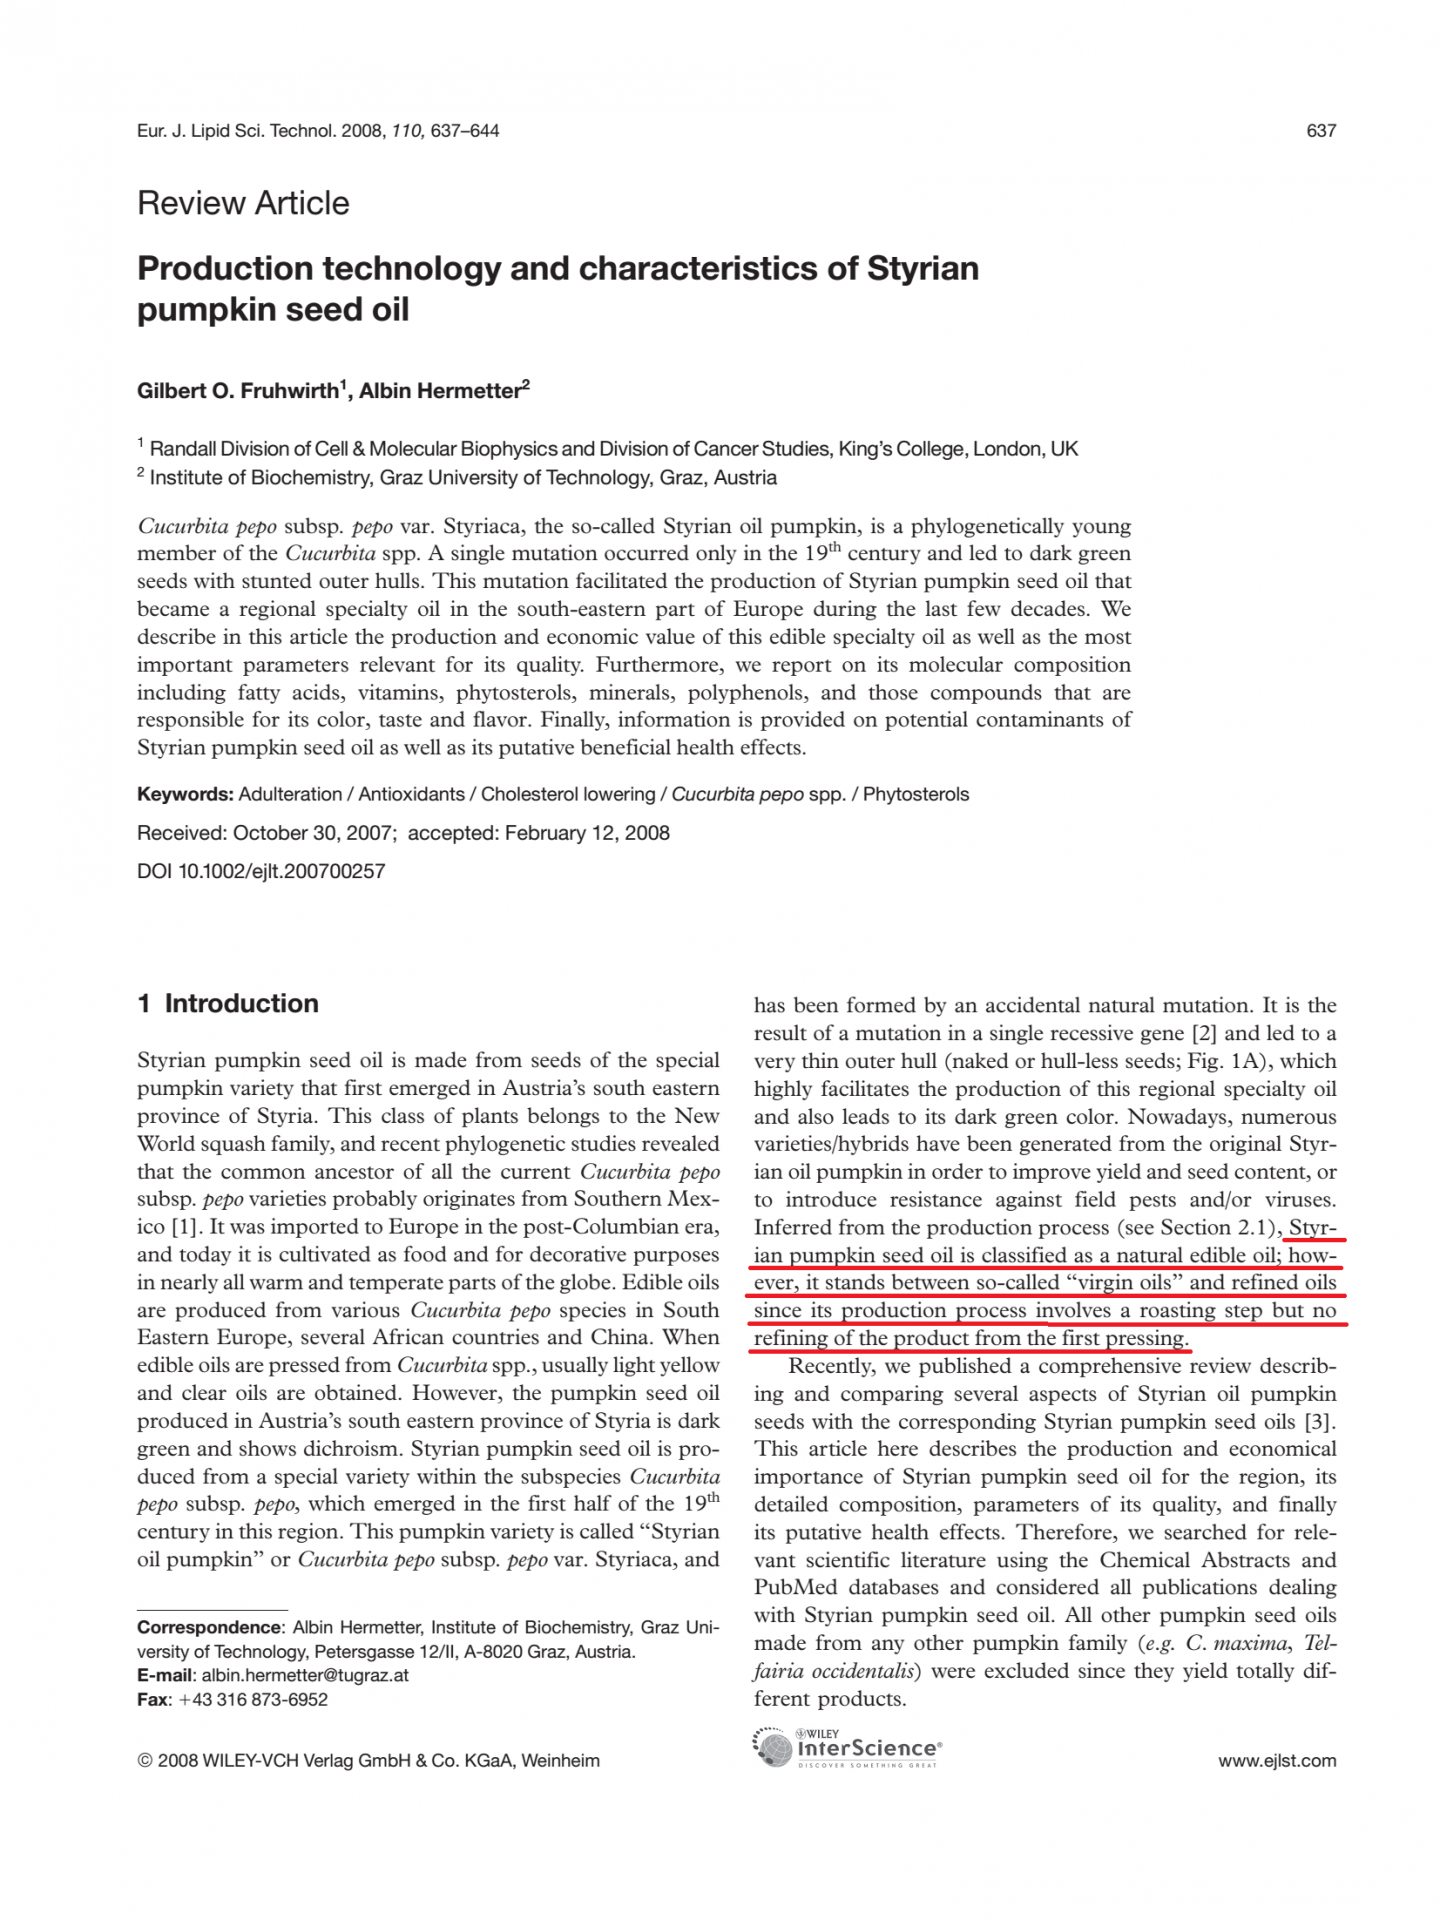 Production technology and characteristics of Styrian pumpkin seed oil